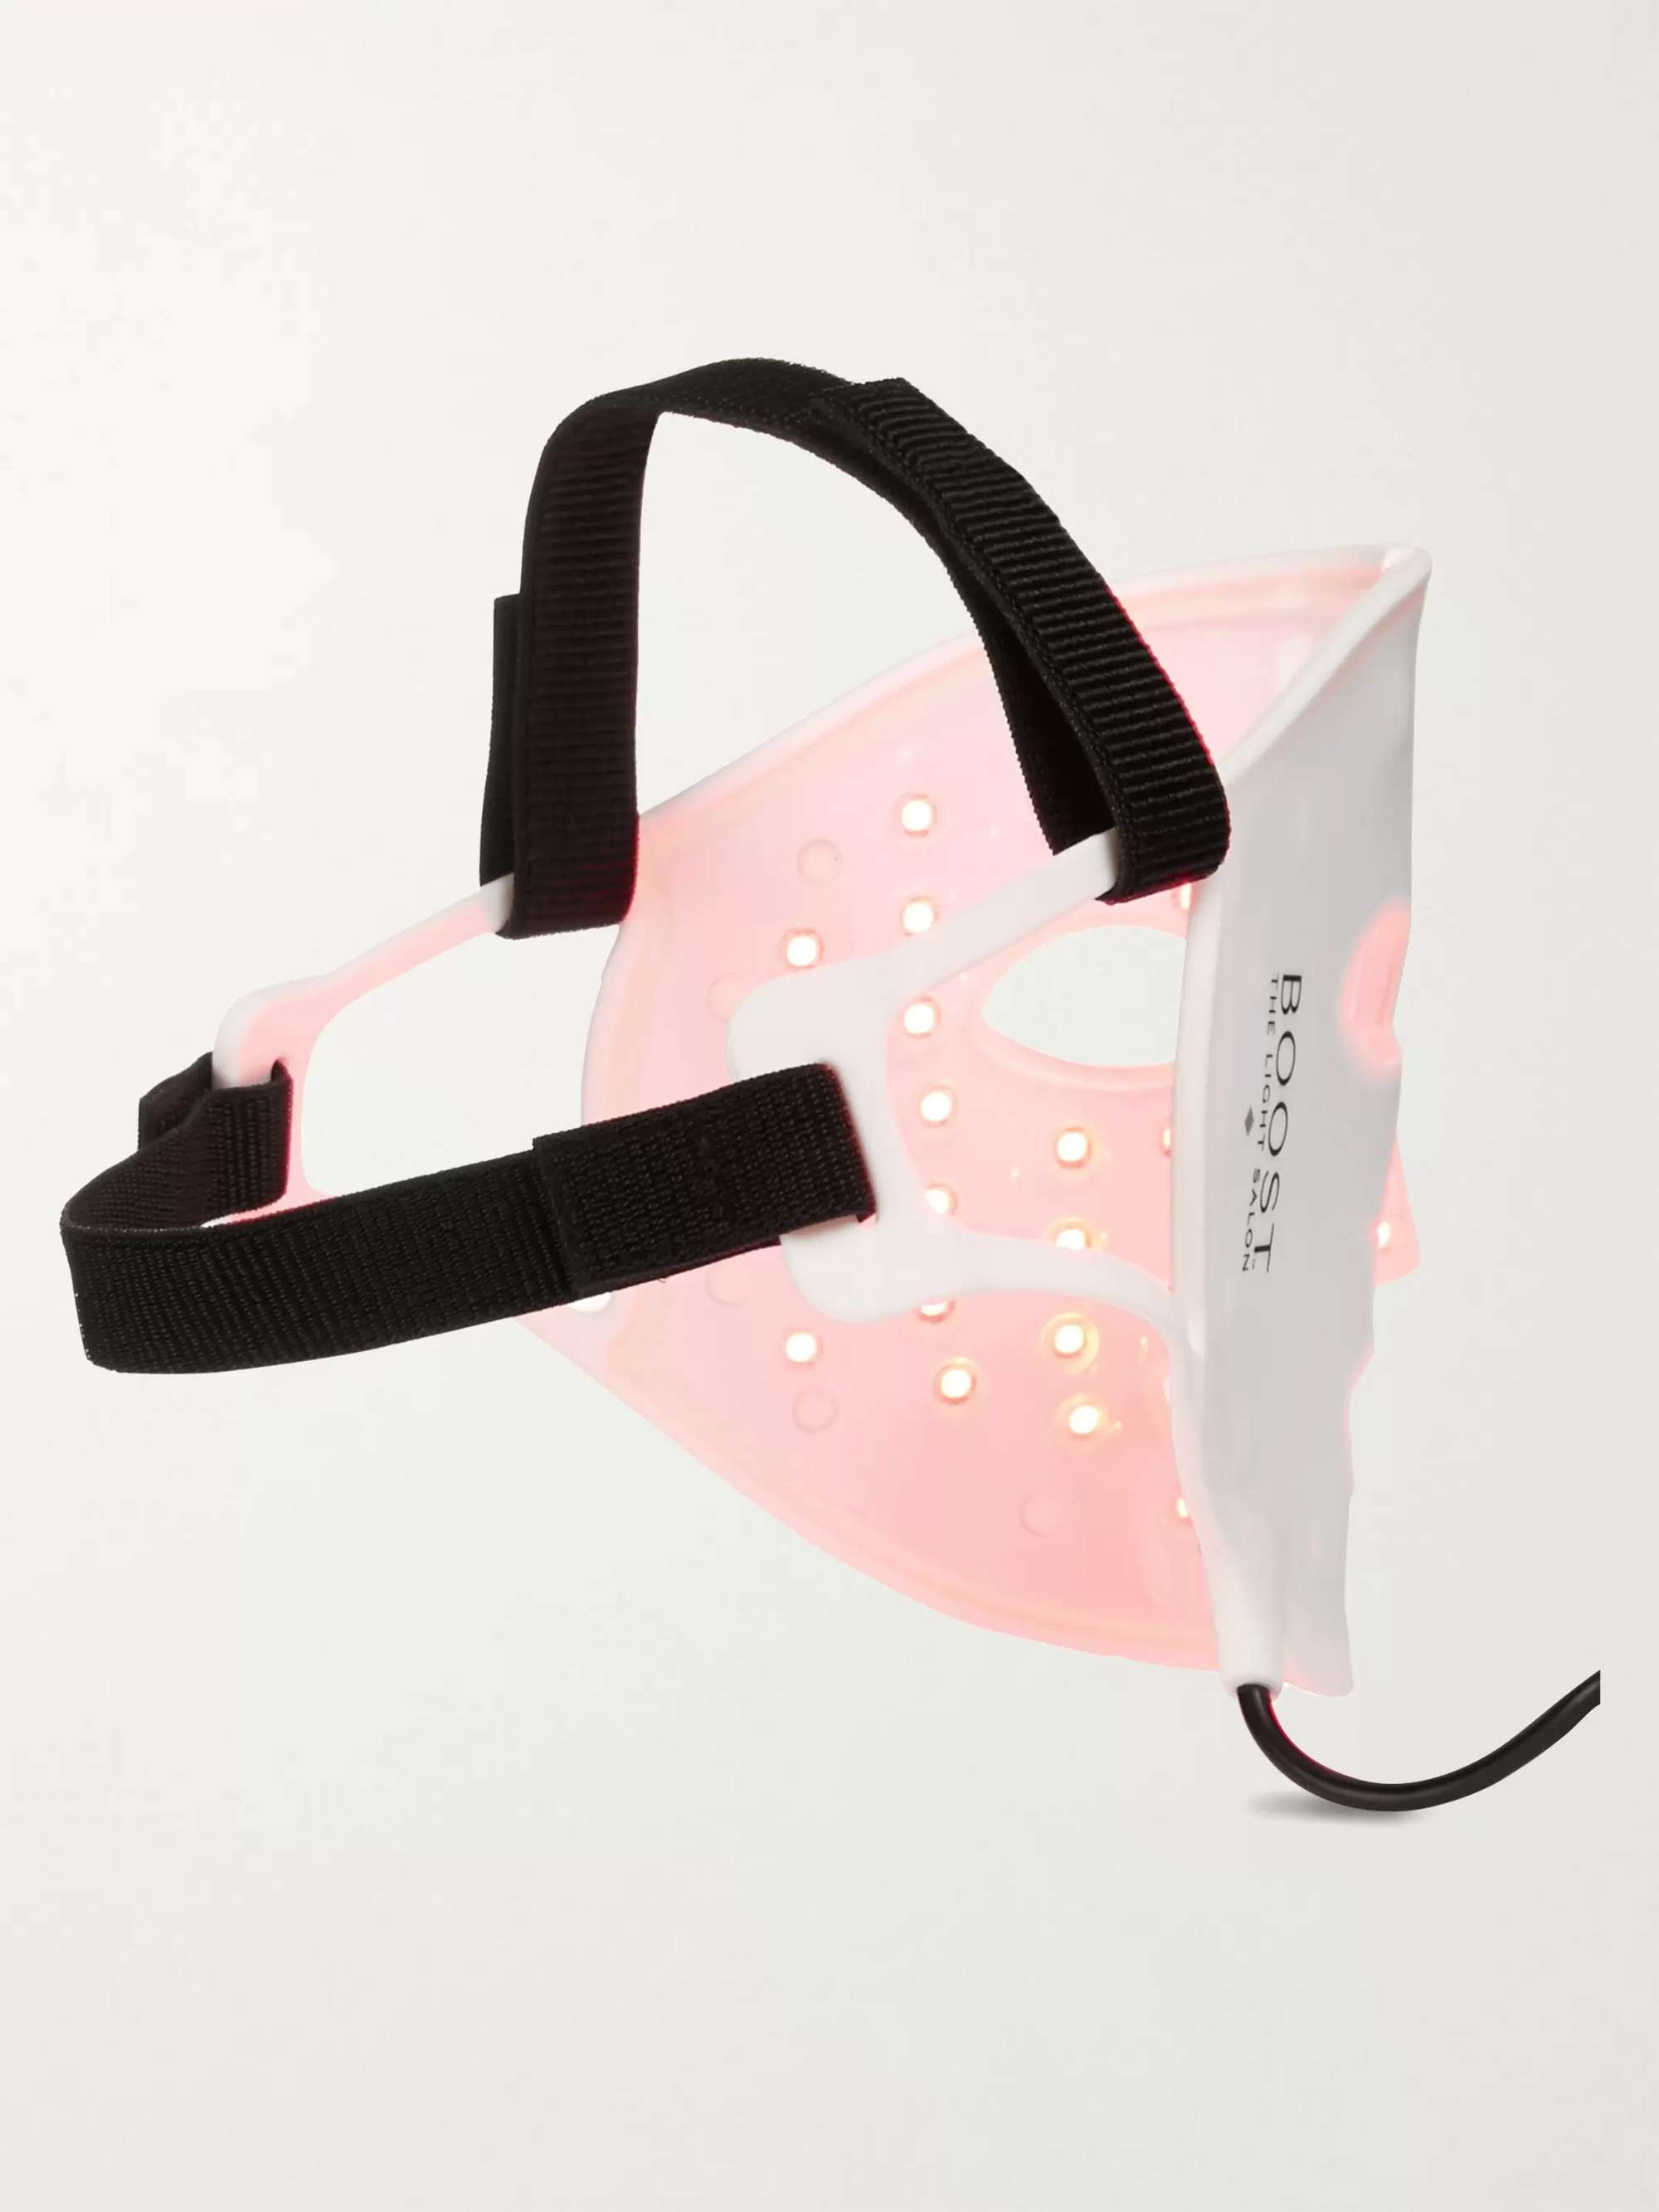 THE LIGHT SALON Boost Advanced LED Light Therapy Face Mask